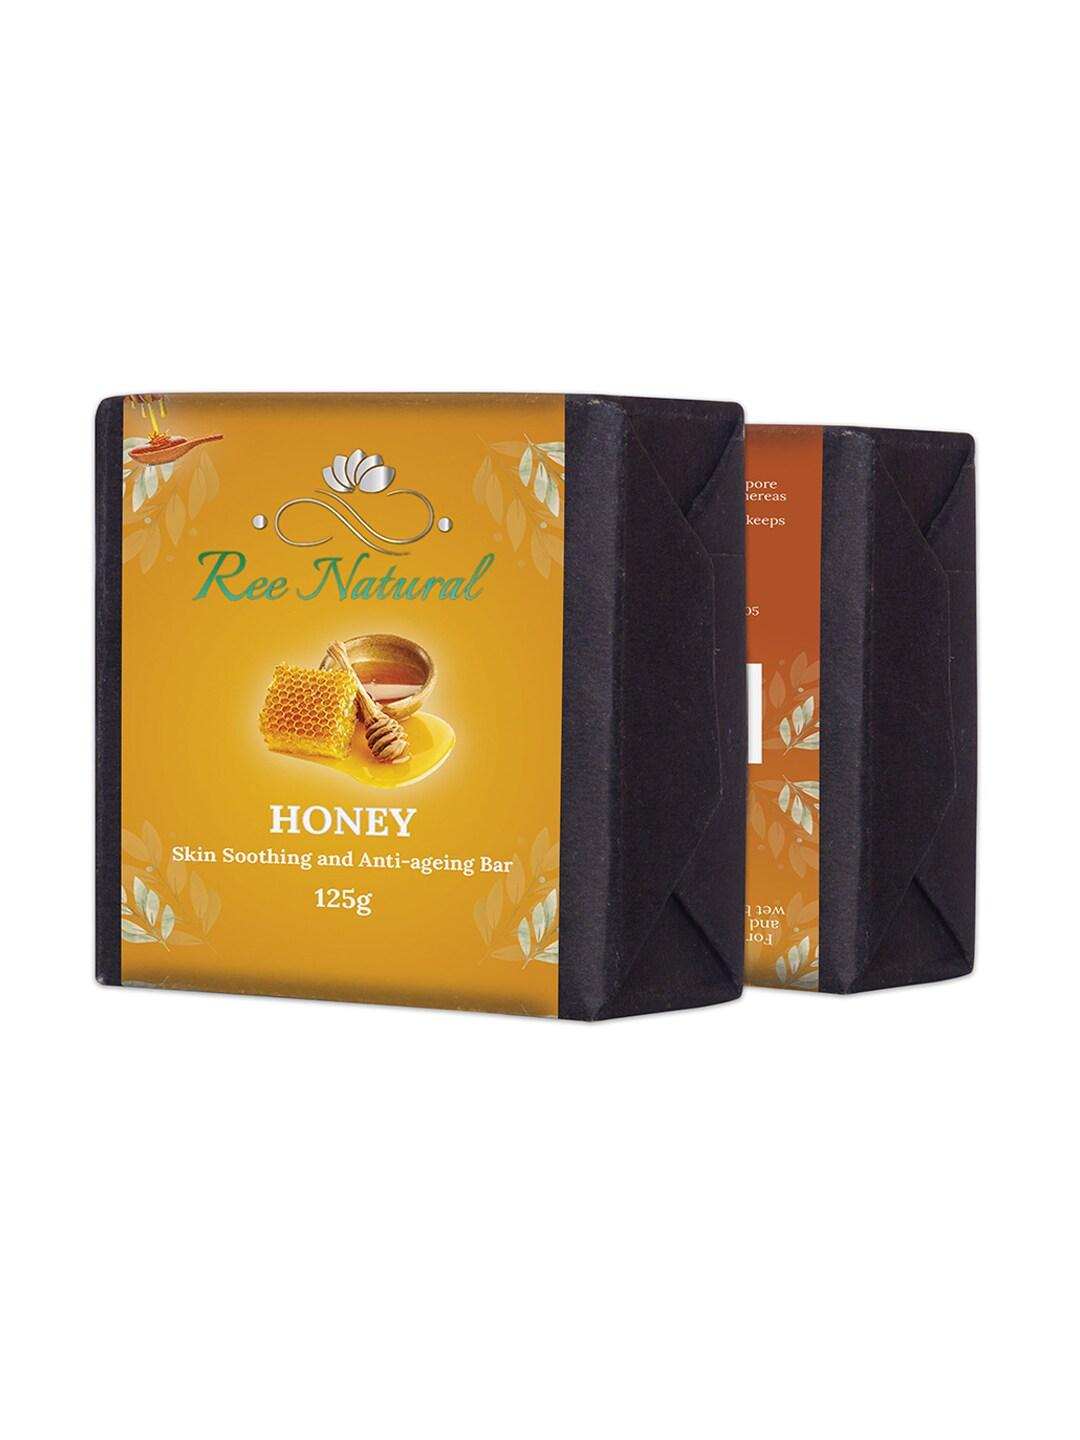 Ree Natural Cold Processed Honey Skin Soothing & Anti-Ageing Bar - 125g